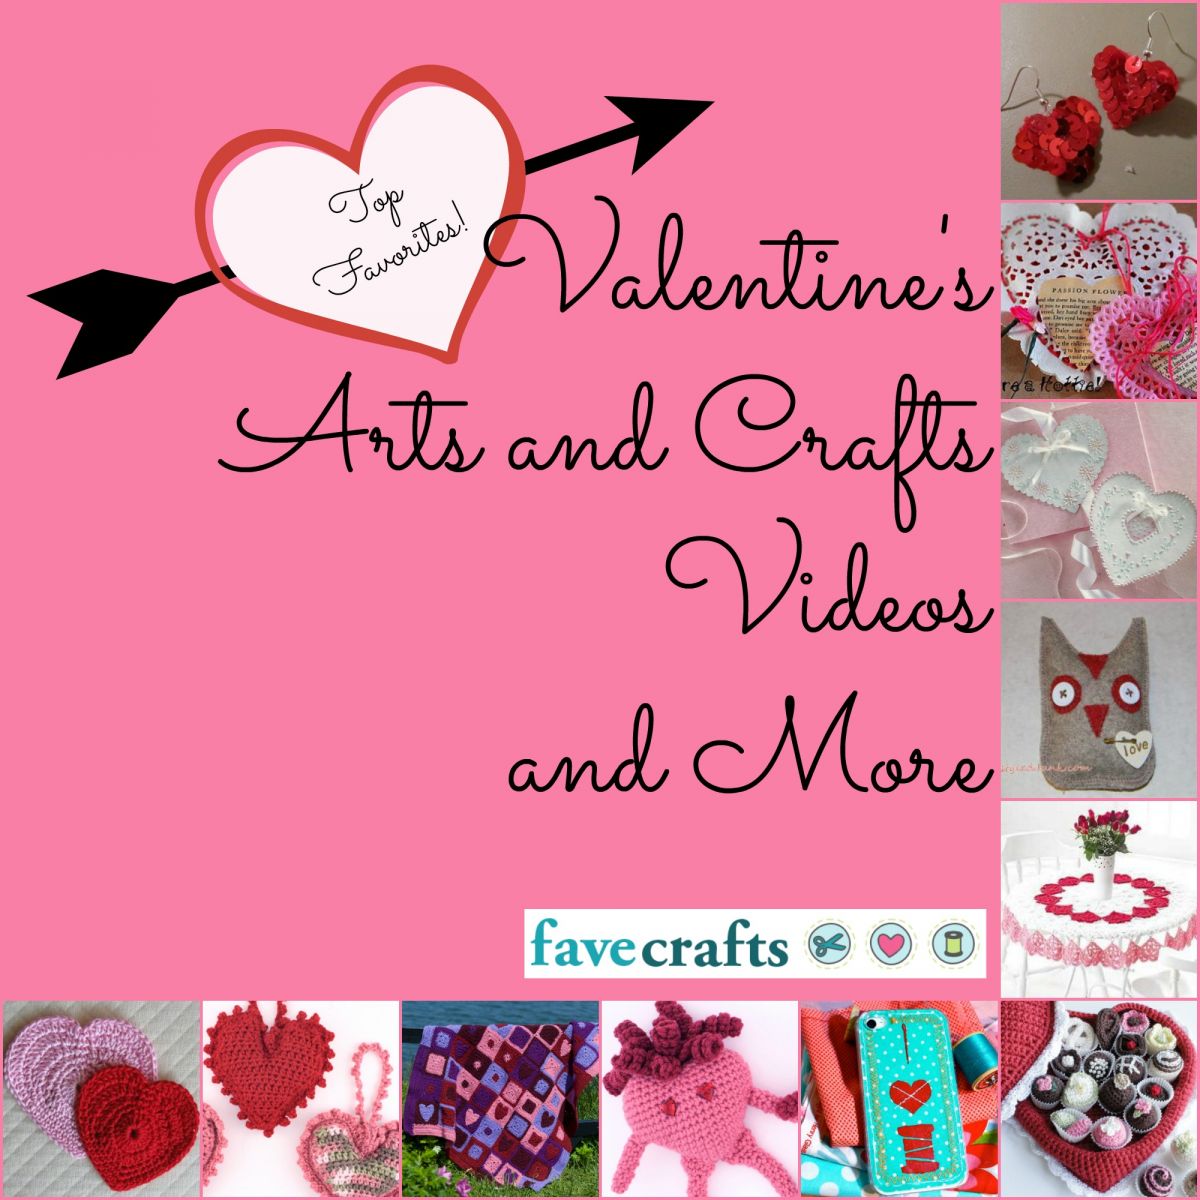 Top Valentine's Arts and Crafts, Videos, and More